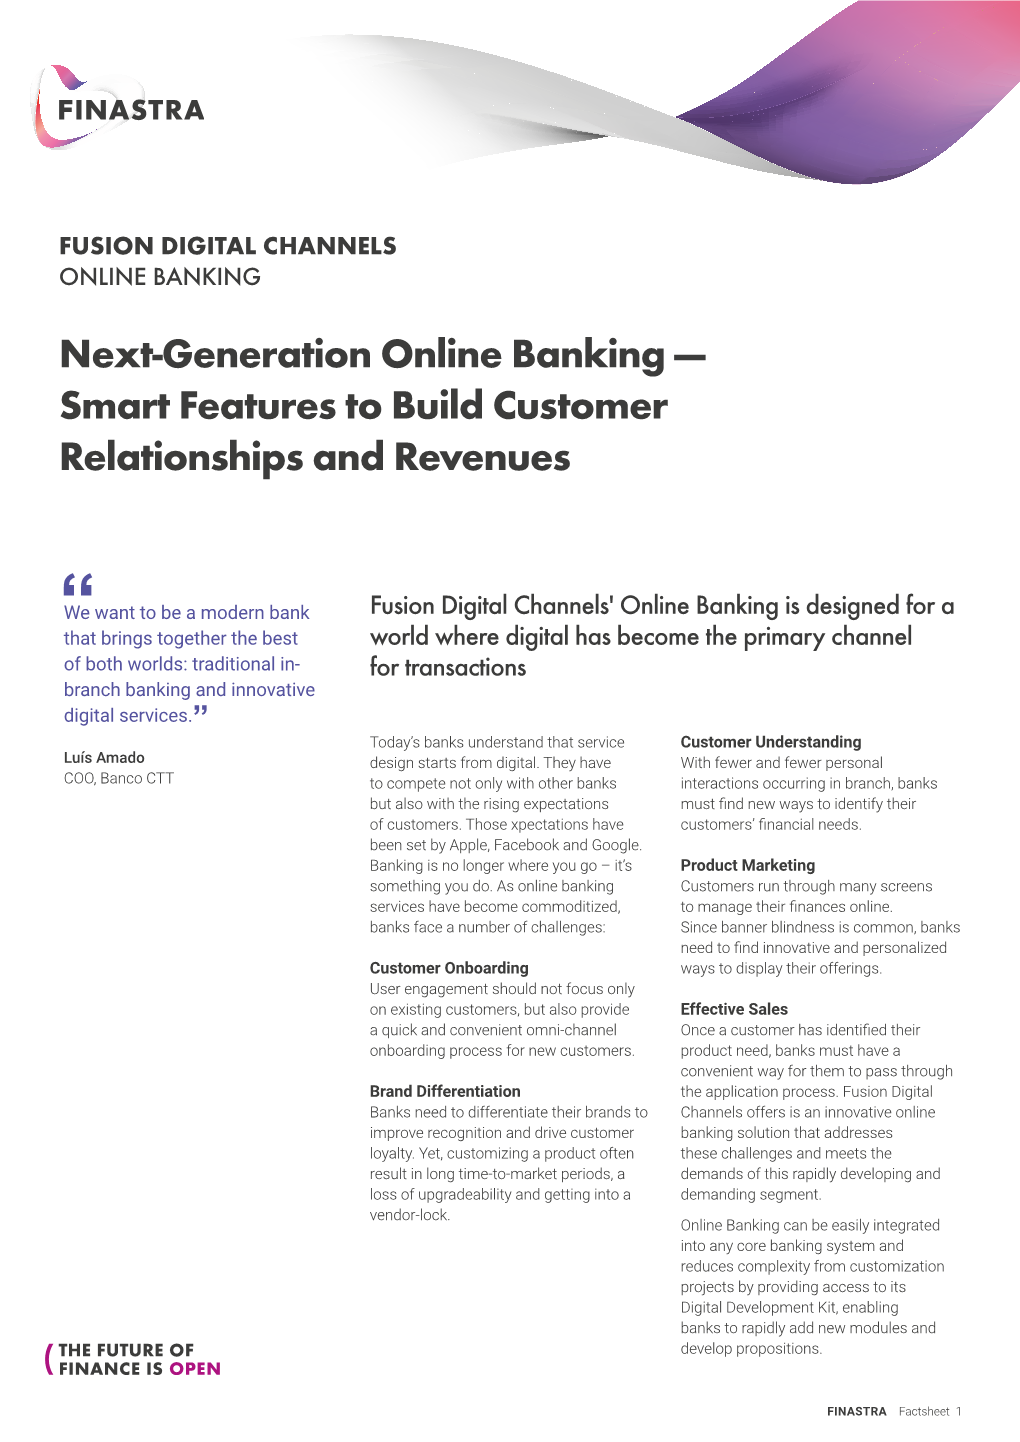 Next-Generation Online Banking — Smart Features to Build Customer Relationships and Revenues